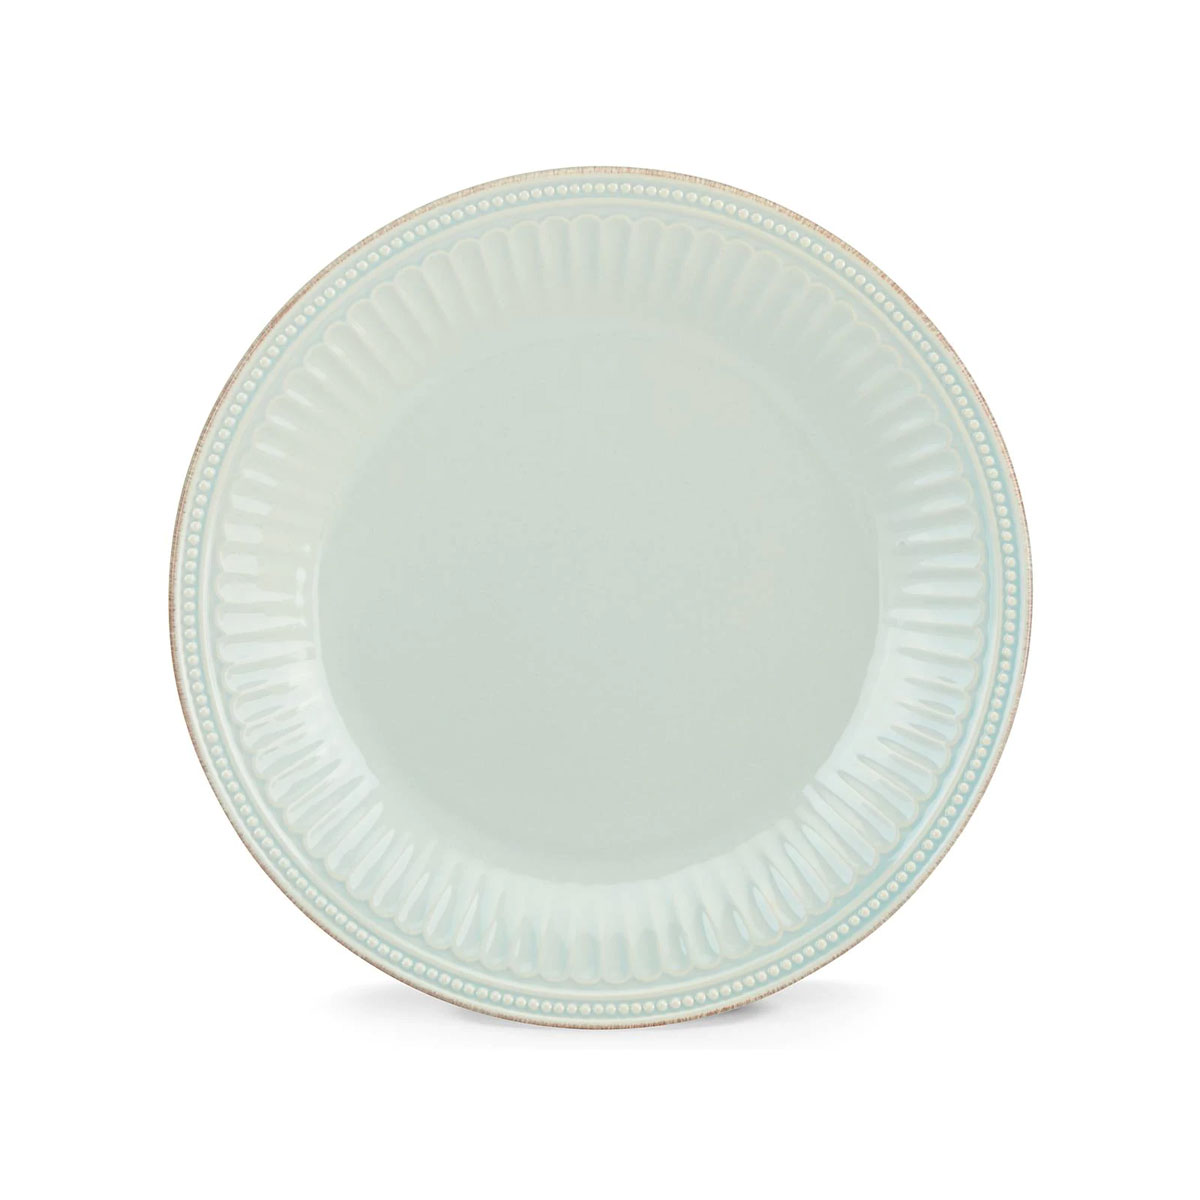 Lenox French Perle Groove Ice Blue China Dinner